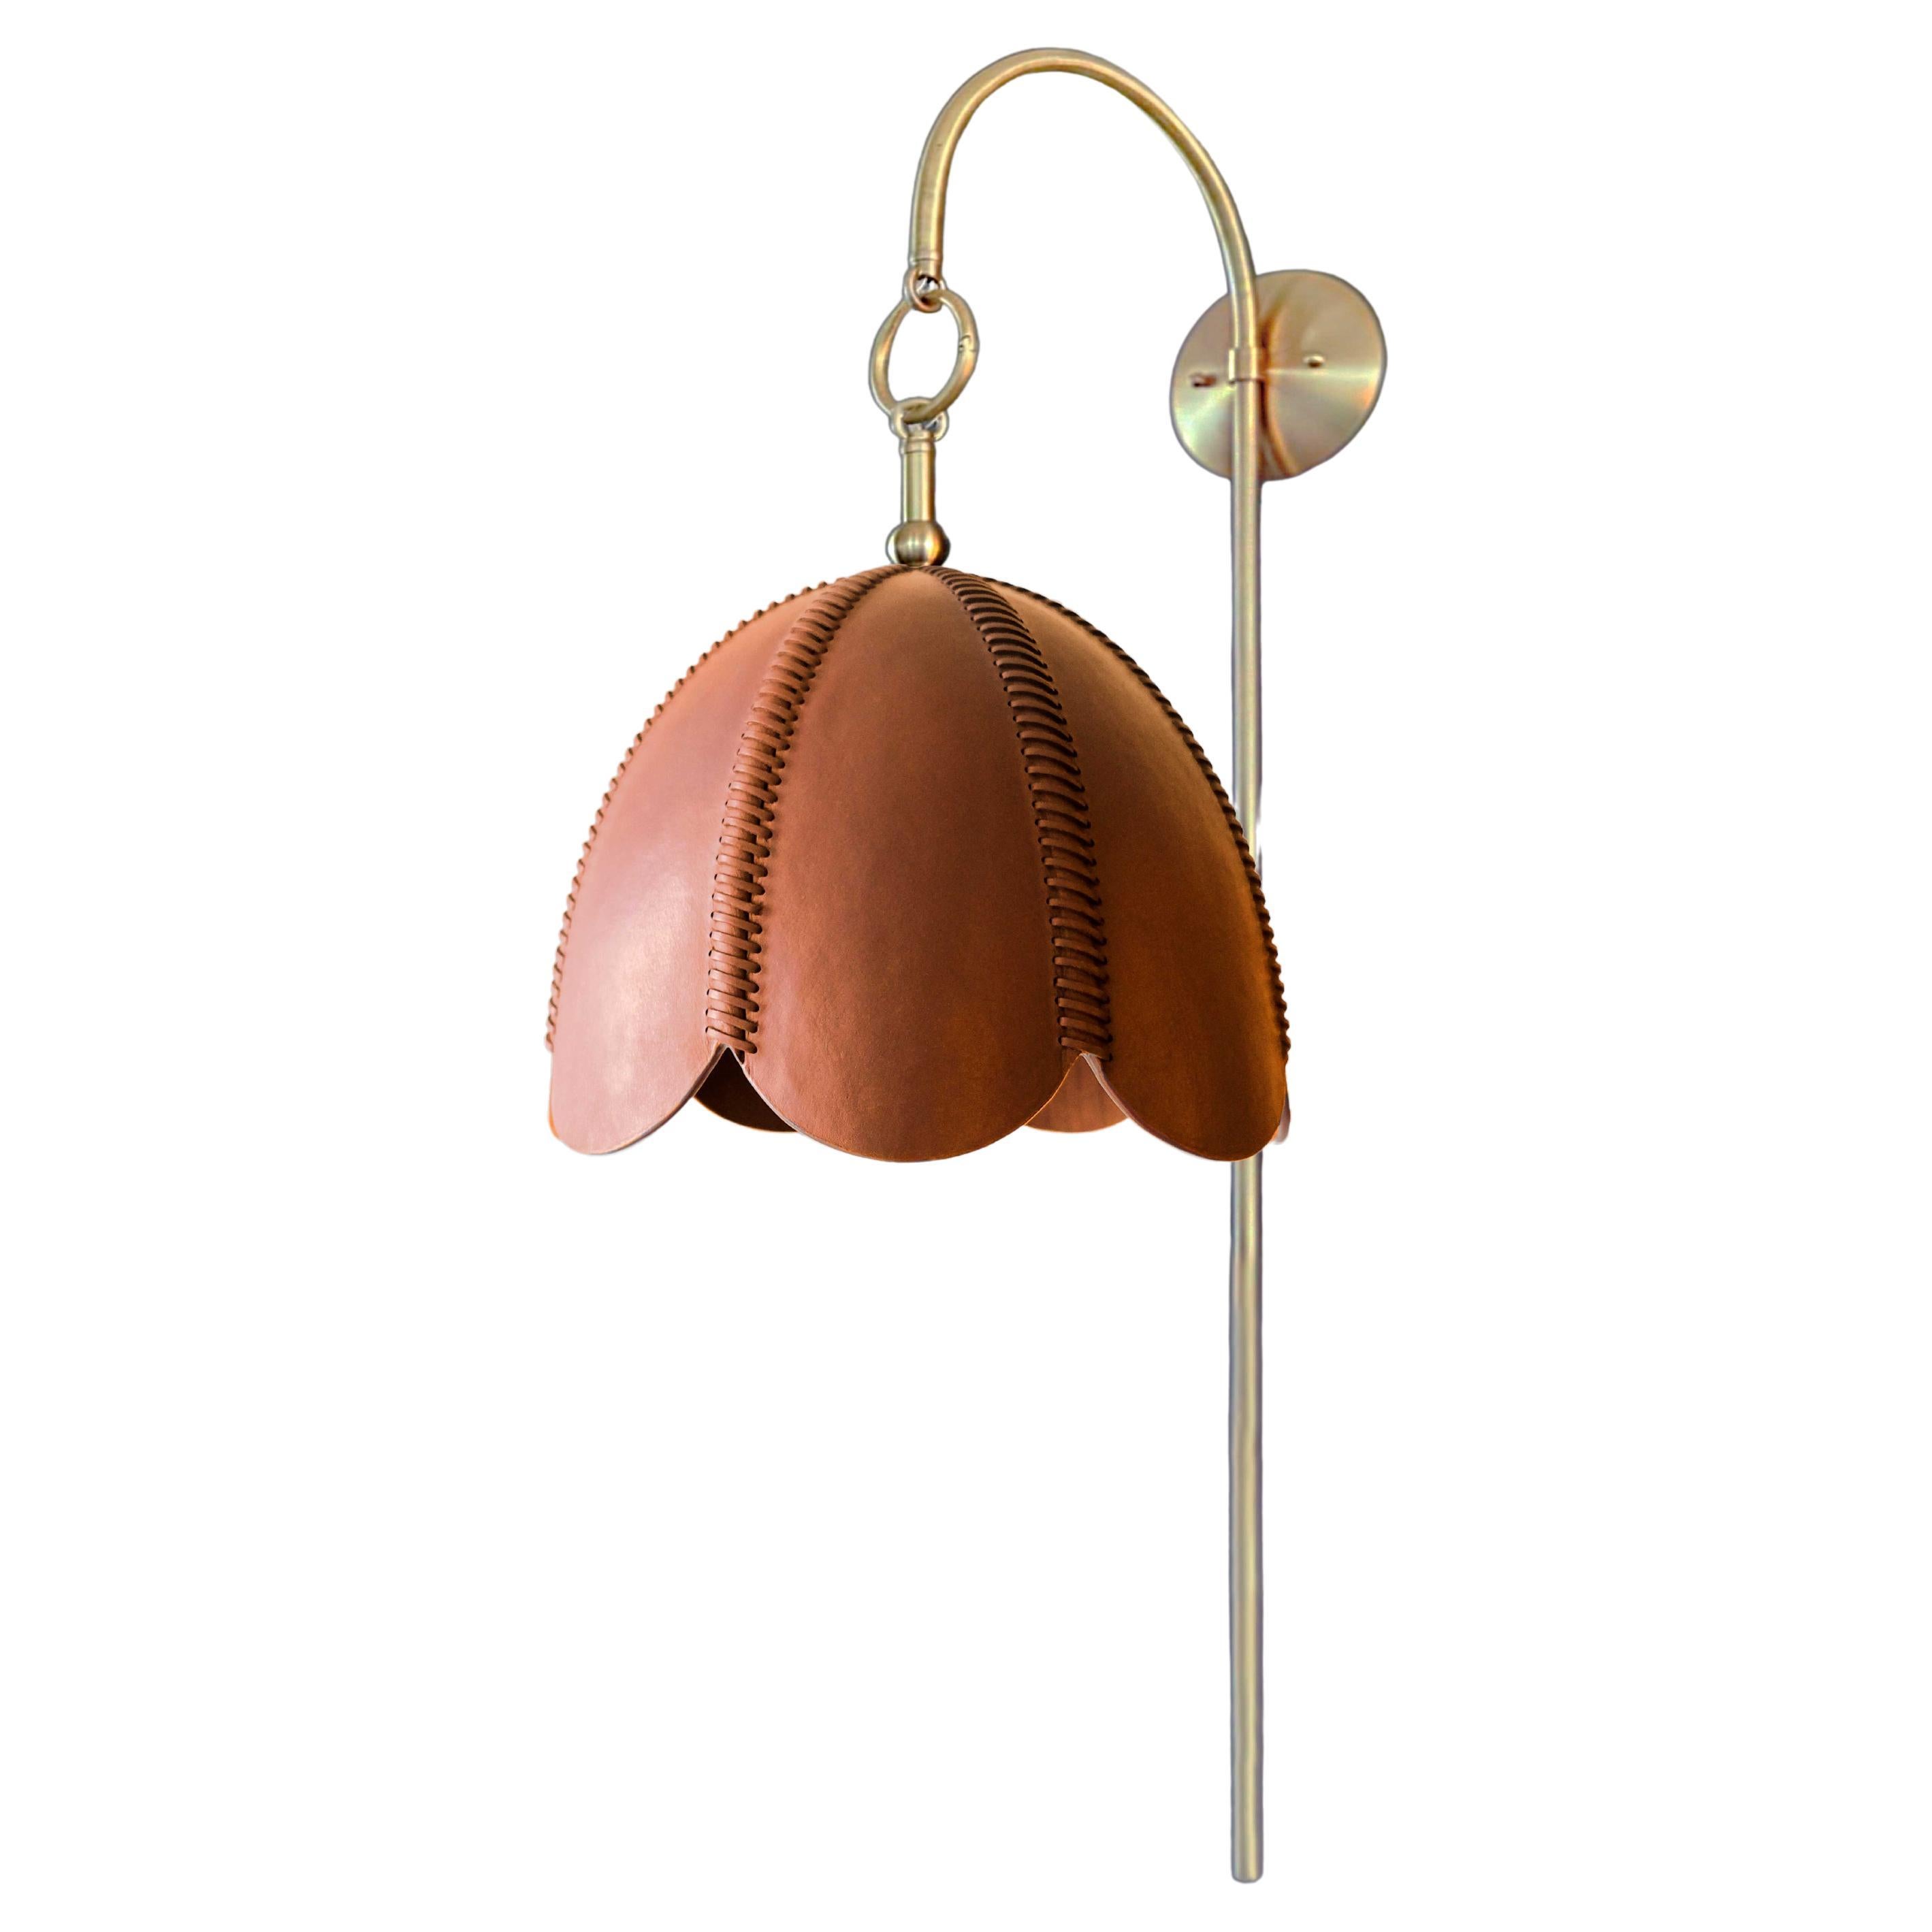 Leather Arched Sconce, Camel, Small, Doma, Saddle Lamp Collection For Sale